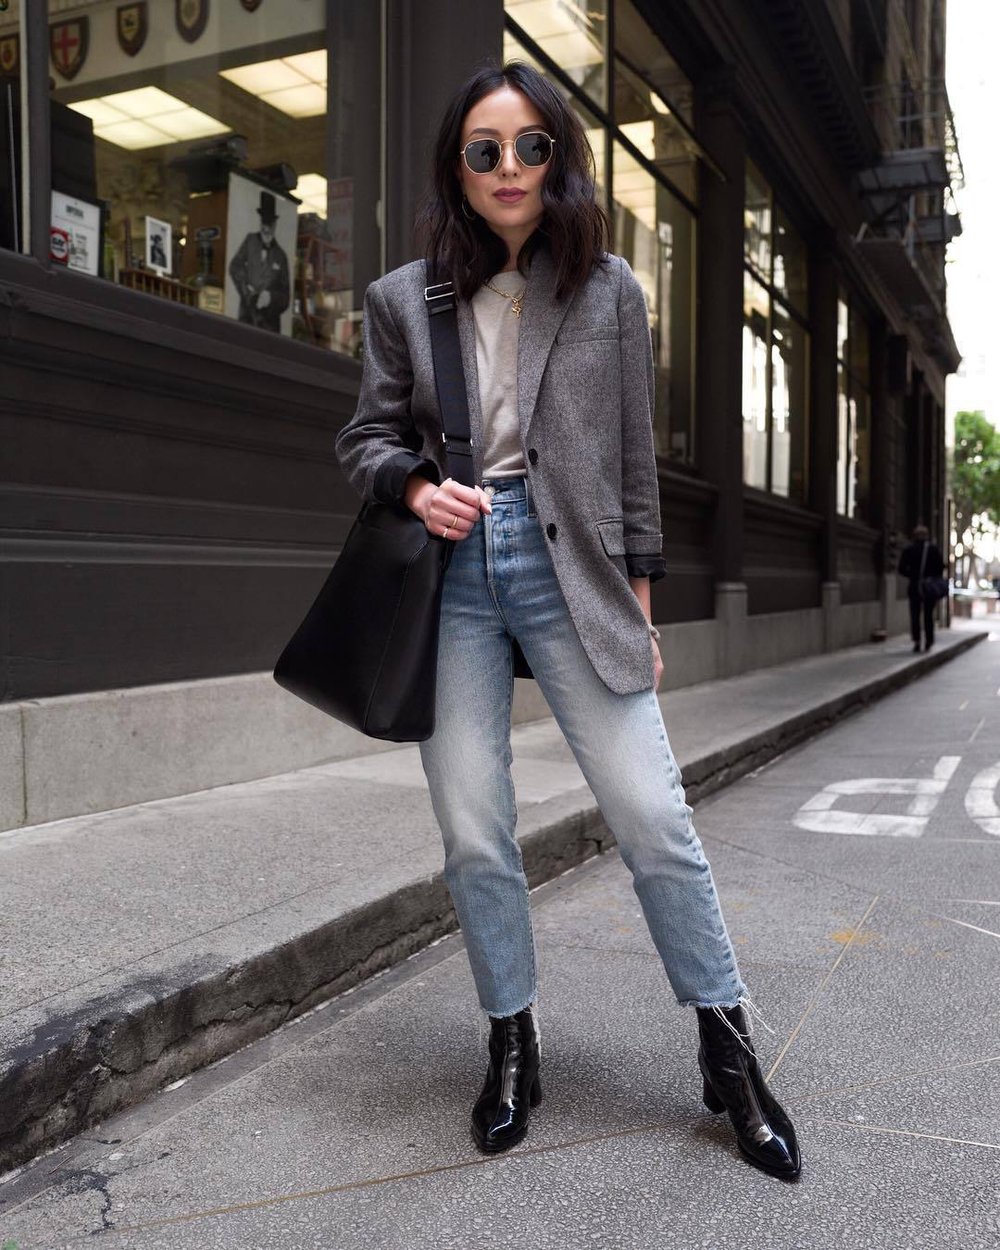 7 Ways to Style Cropped Jeans with Confidence - One Of A Style